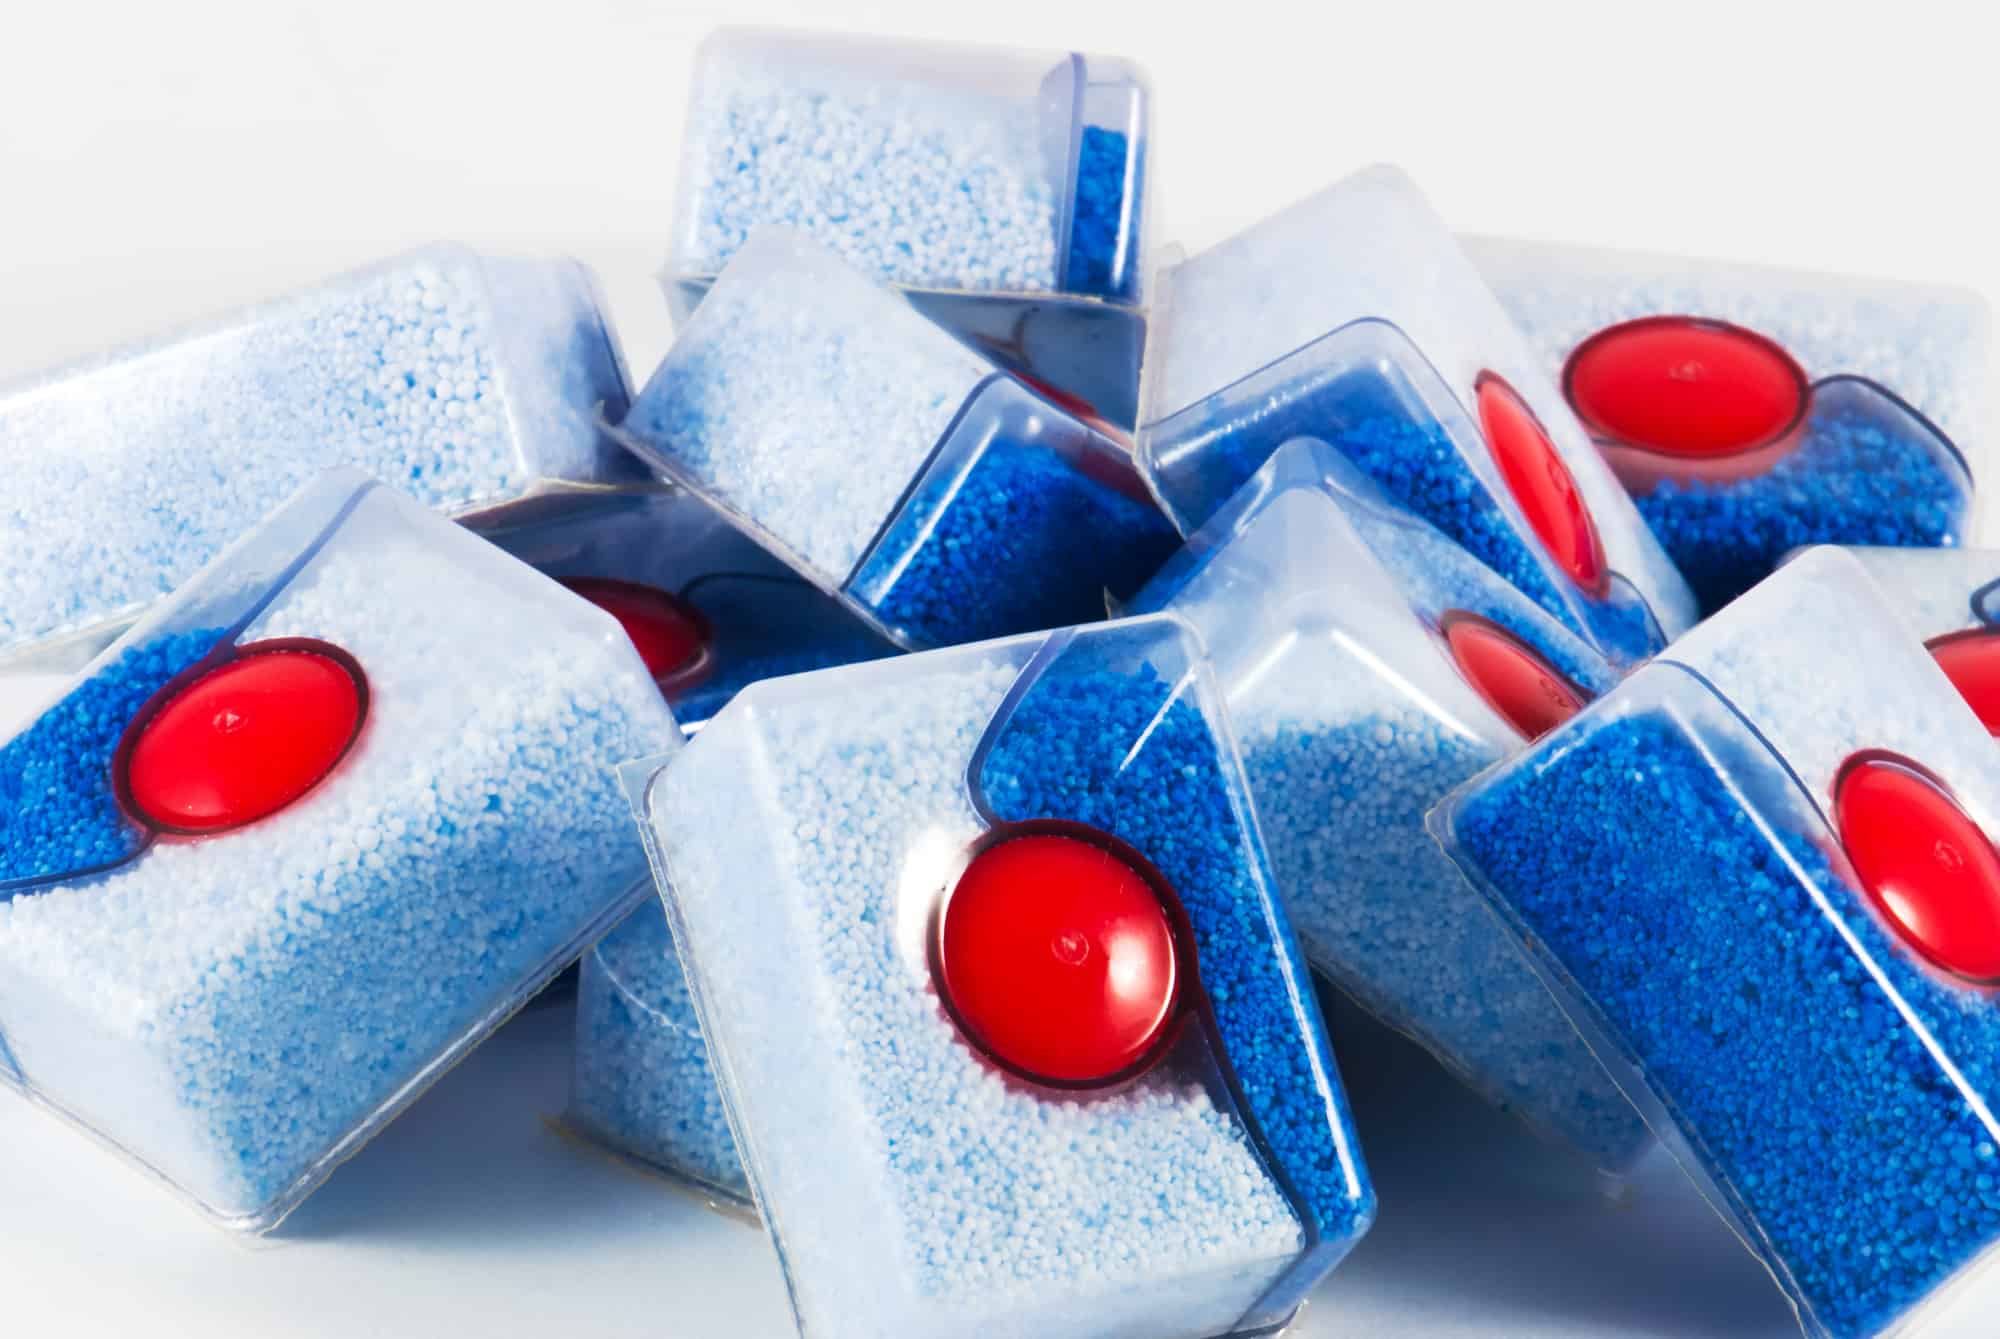 dishwasher tablets for cleaning jetted tub